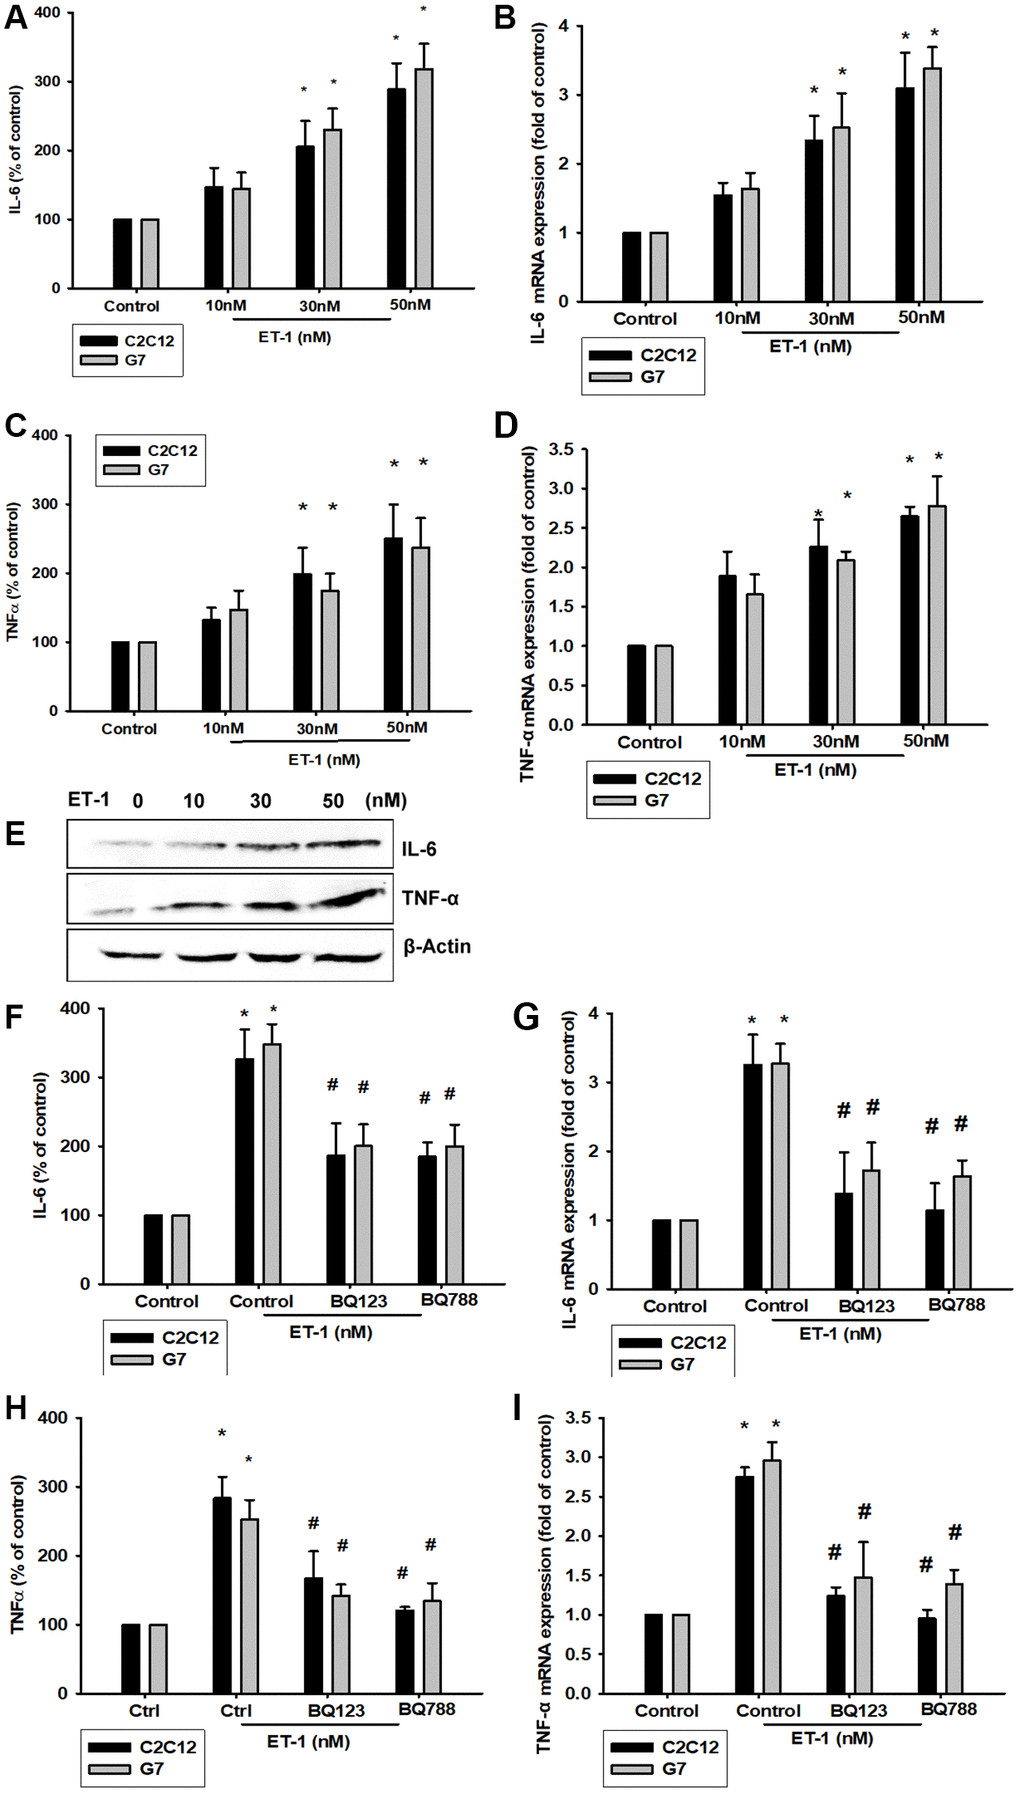 ET-1 induces IL-6 and TNF-α mRNA and protein levels through ET receptor pathways in myocyte cells (C2C12 and G7 cell lines). (A–E) Cells were incubated with ET-1 (10–50 nM) and the levels of IL-6 and TNF-α mRNA and protein expression were examined by EILSA, qPCR, and Western blot assays. (F–I) Cells were pretreated with ETRs inhibitors BQ123 (5 μM) and BQ788 (5 μM) then stimulated with ET-1. The IL-6 and TNF-α mRNA and protein expression levels were examined by EILSA and qPCR assays. Results are expressed of four independent experiments performed in triplicate. *p #p 